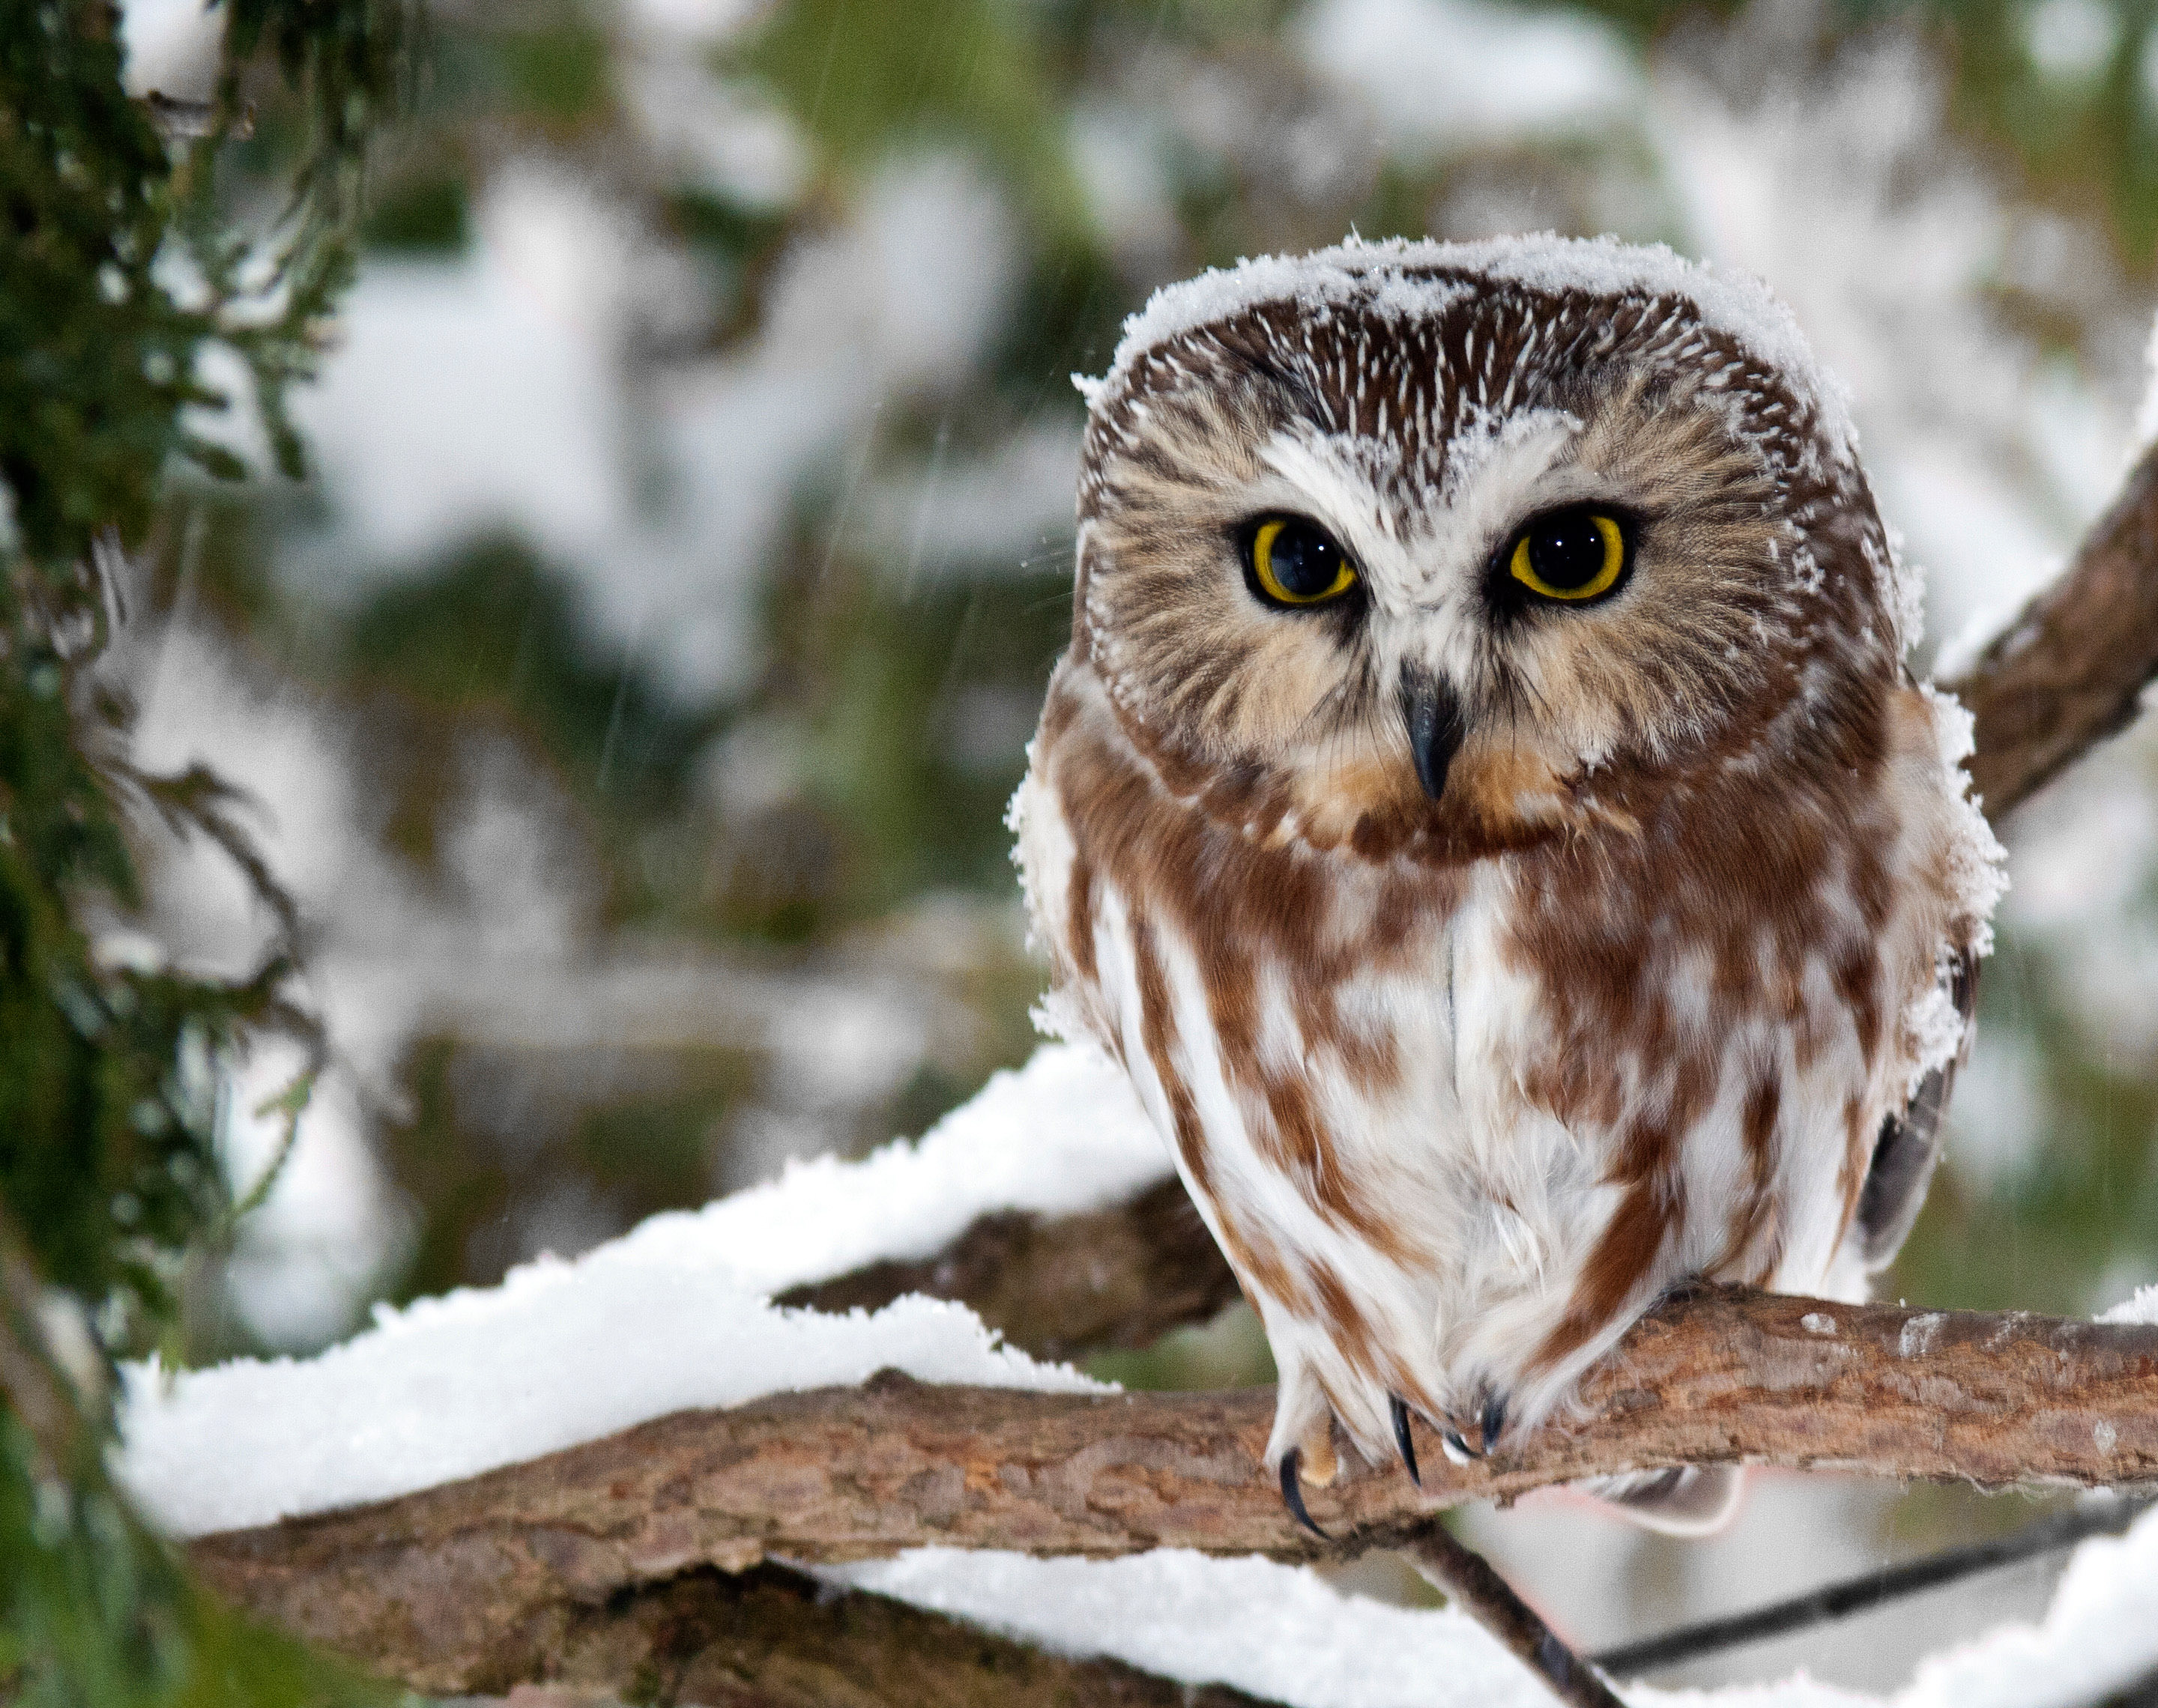 A small brown and white owl perches on a snowy branch.